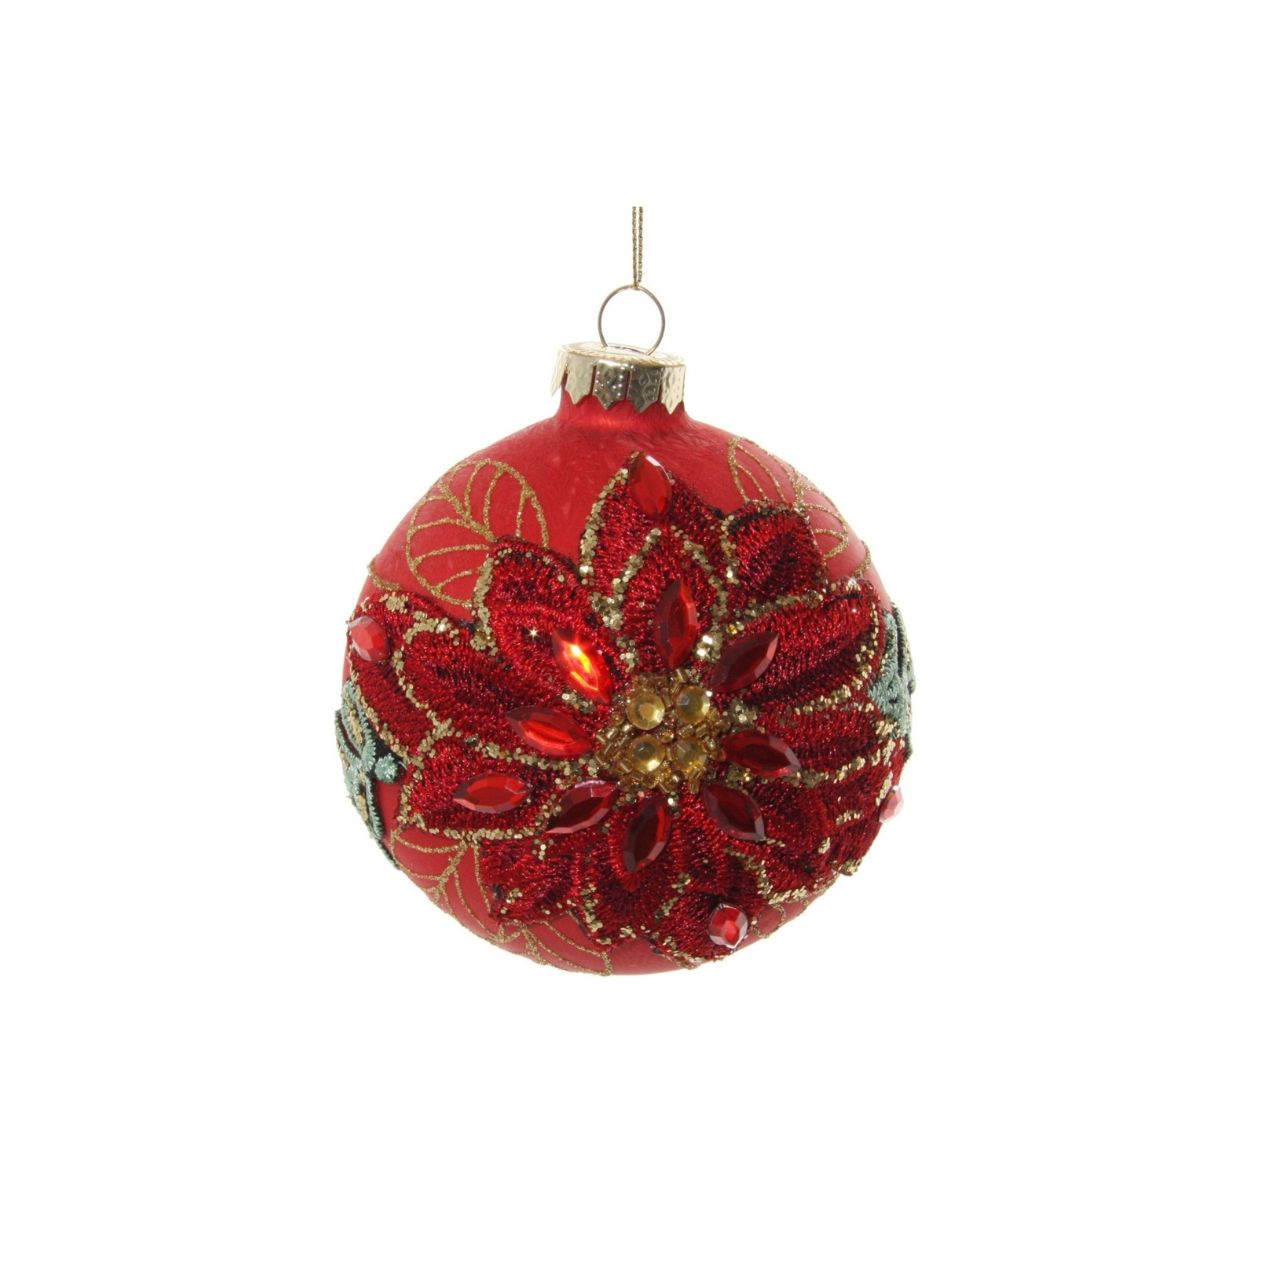 Shishi Glass Red Ball Frosted with Poinsettia Embroidery Hanging Ornament  Browse our beautiful range of luxury festive Christmas tree decorations, baubles & ornaments for your tree this Christmas.